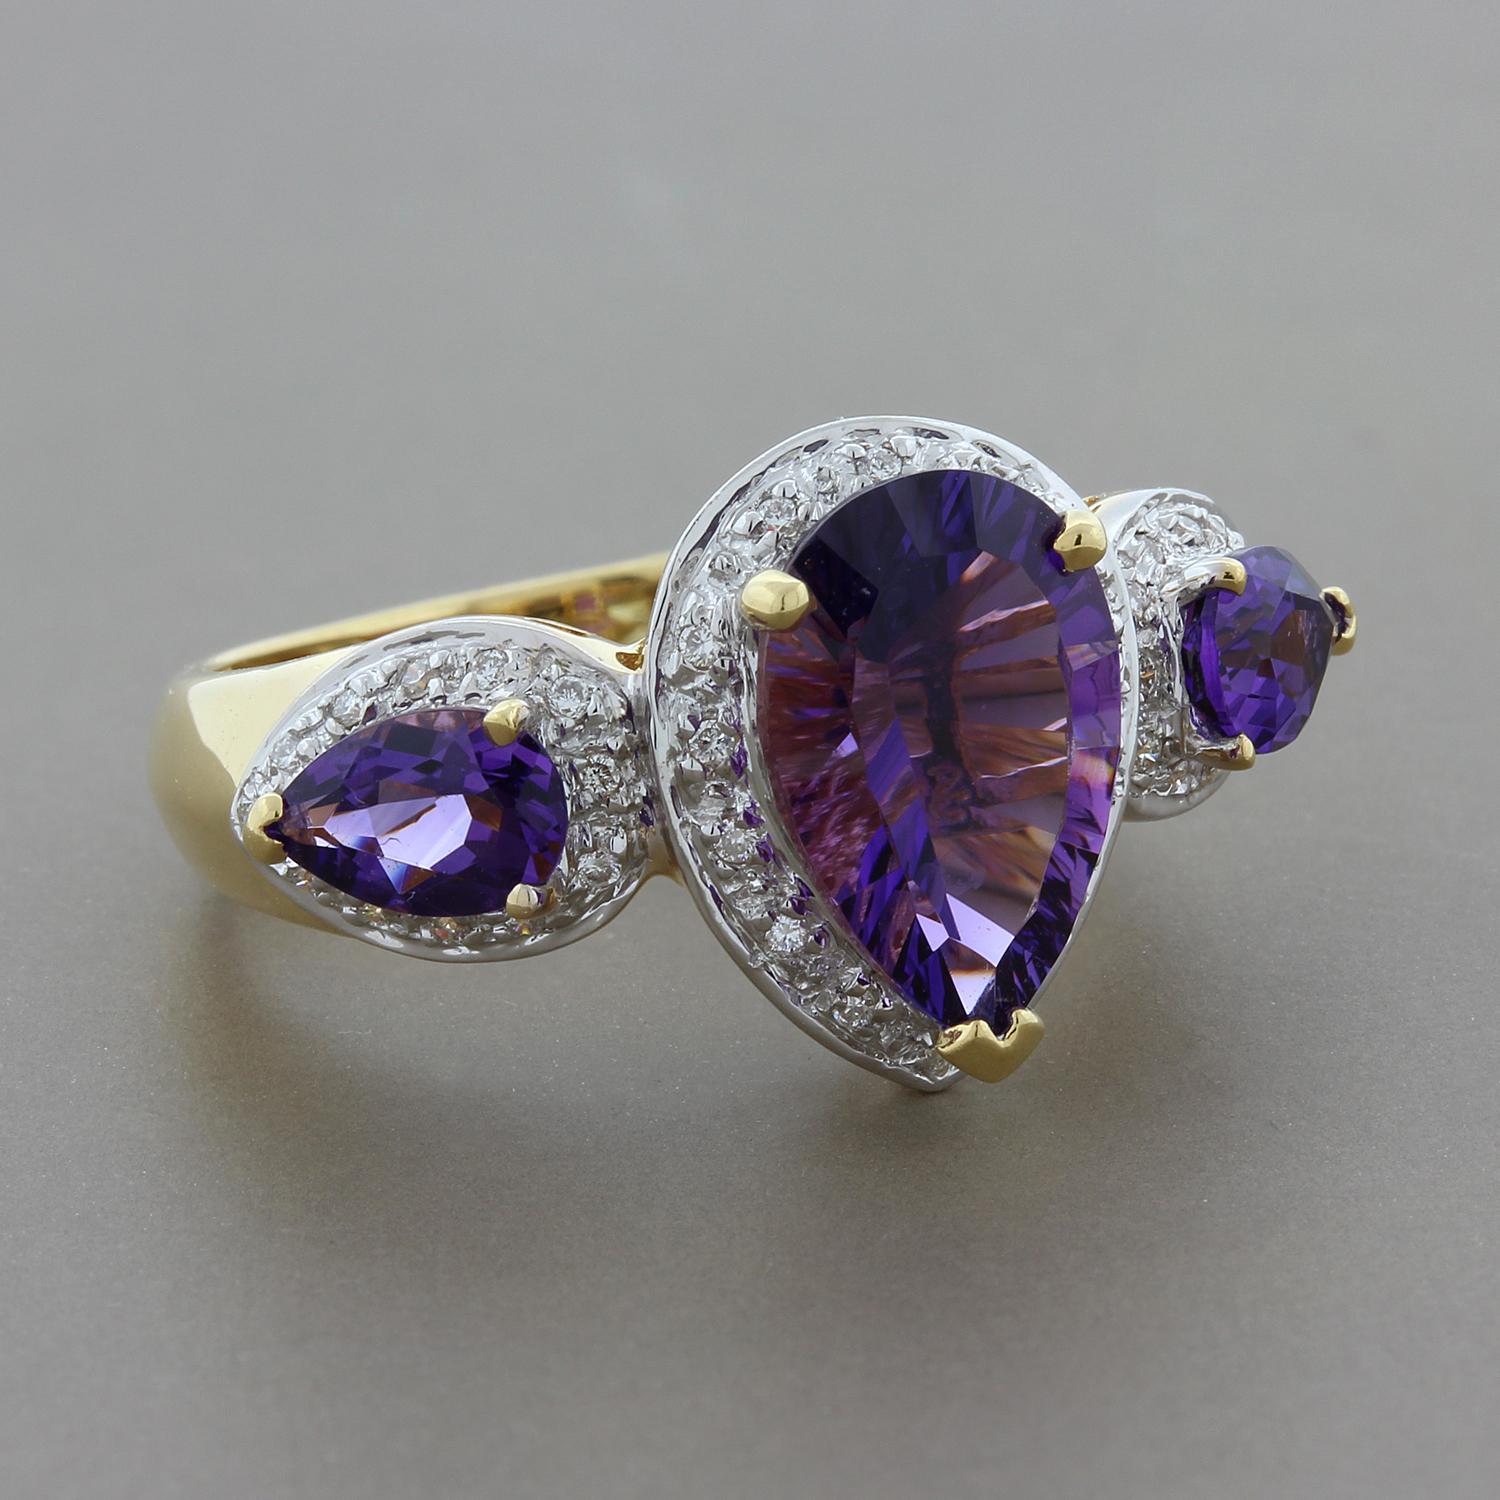 A Bellarri original, this piece features 3 pear shape amethysts weighting a total of 2.58 carats. They are each haloed by round cut diamonds totaling 0.12 carats, all set in 18K yellow gold.

Currently ring size 6.75